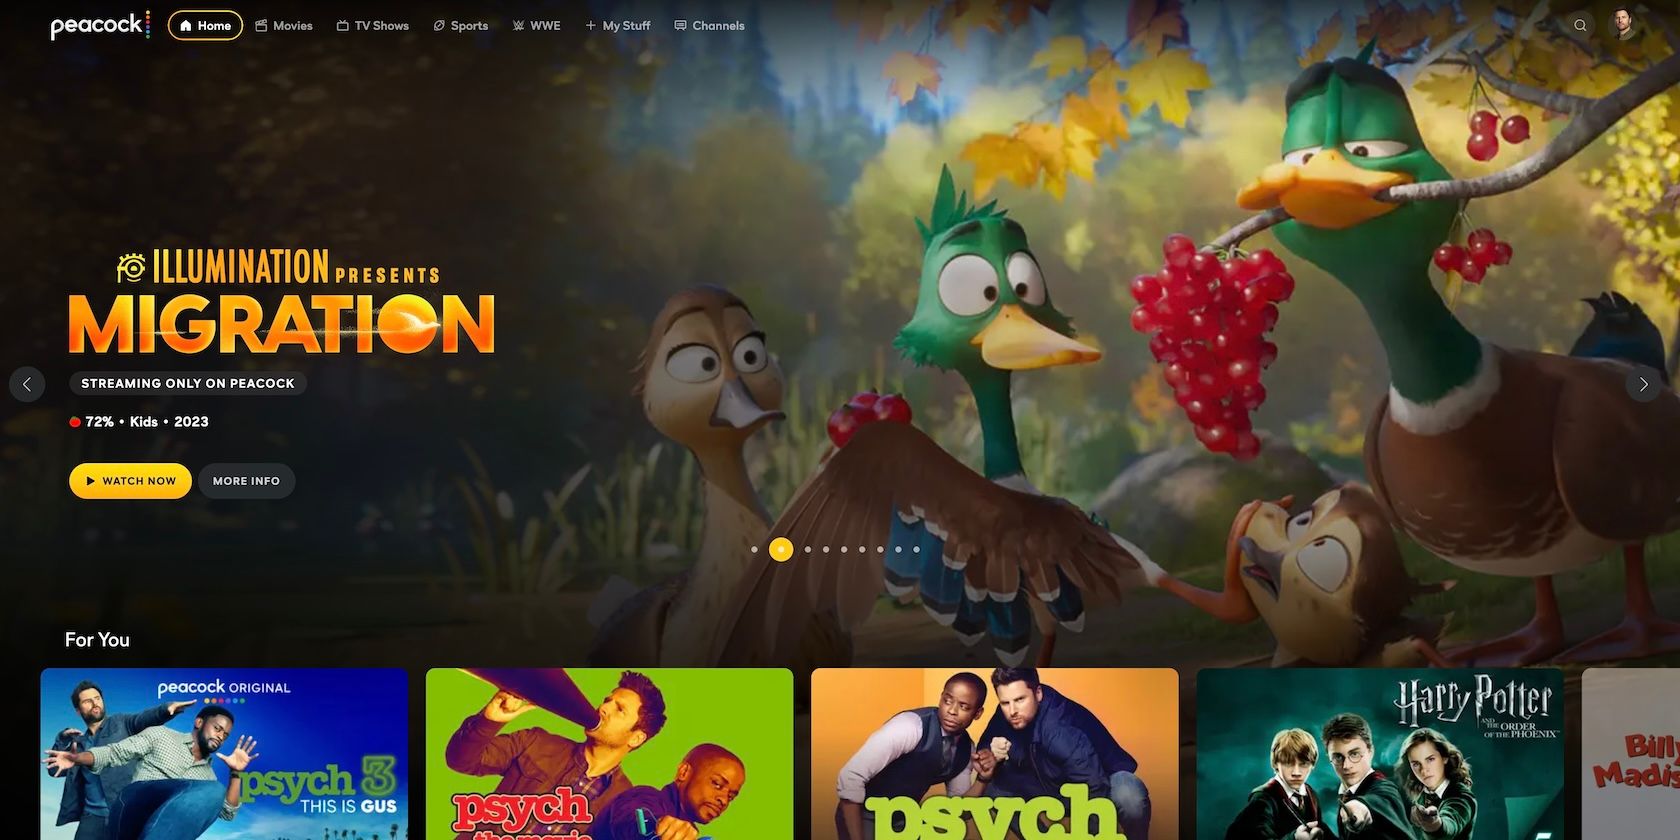 Peacock Home Page wil Migration featured